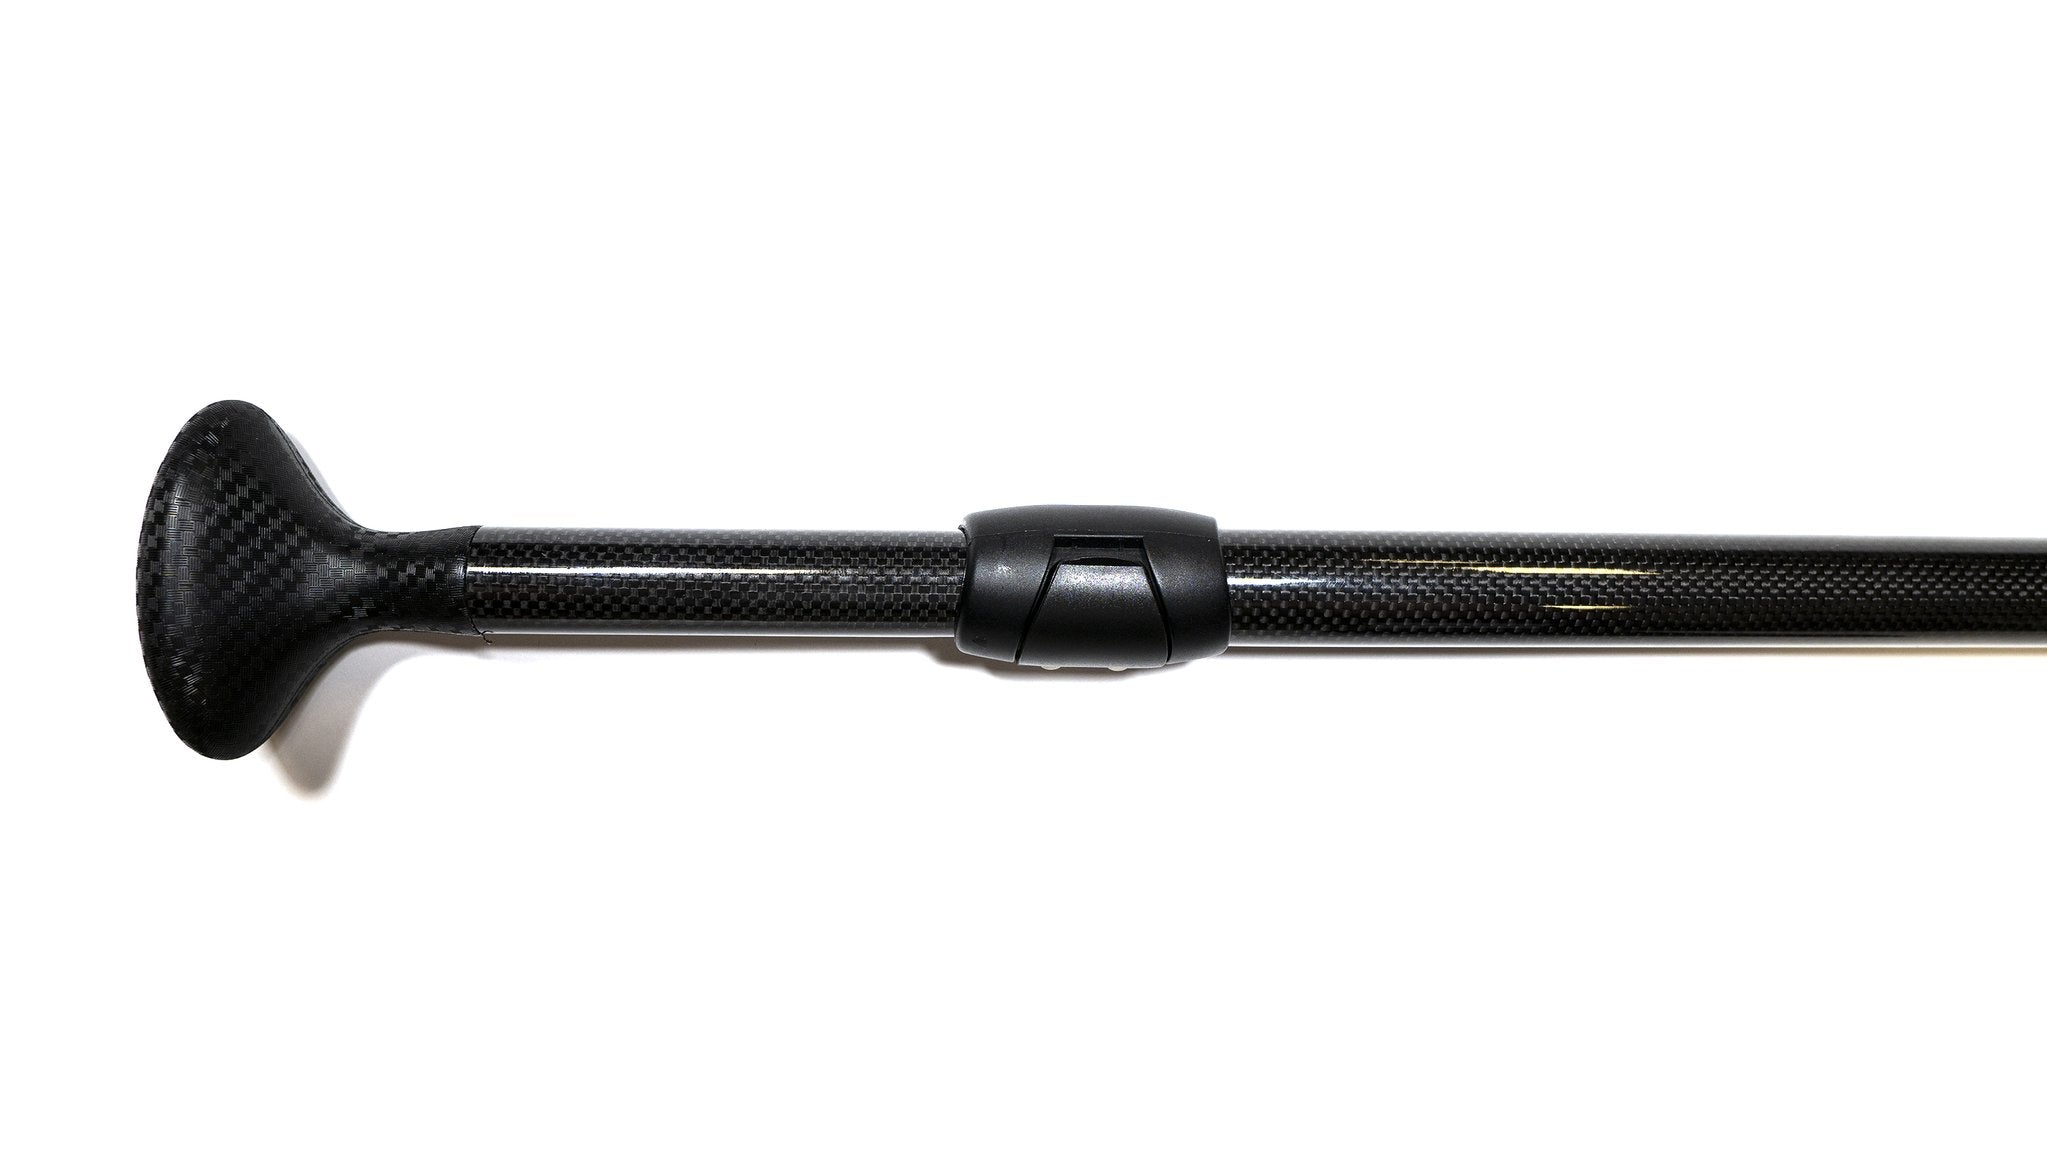 60% Carbon Fiber Composite Shaft reduces weight and adds stiffness Durable PP+Fiber Blades (a blend of polypropylene and fiberglass) Double Paddle Adjusts between 112